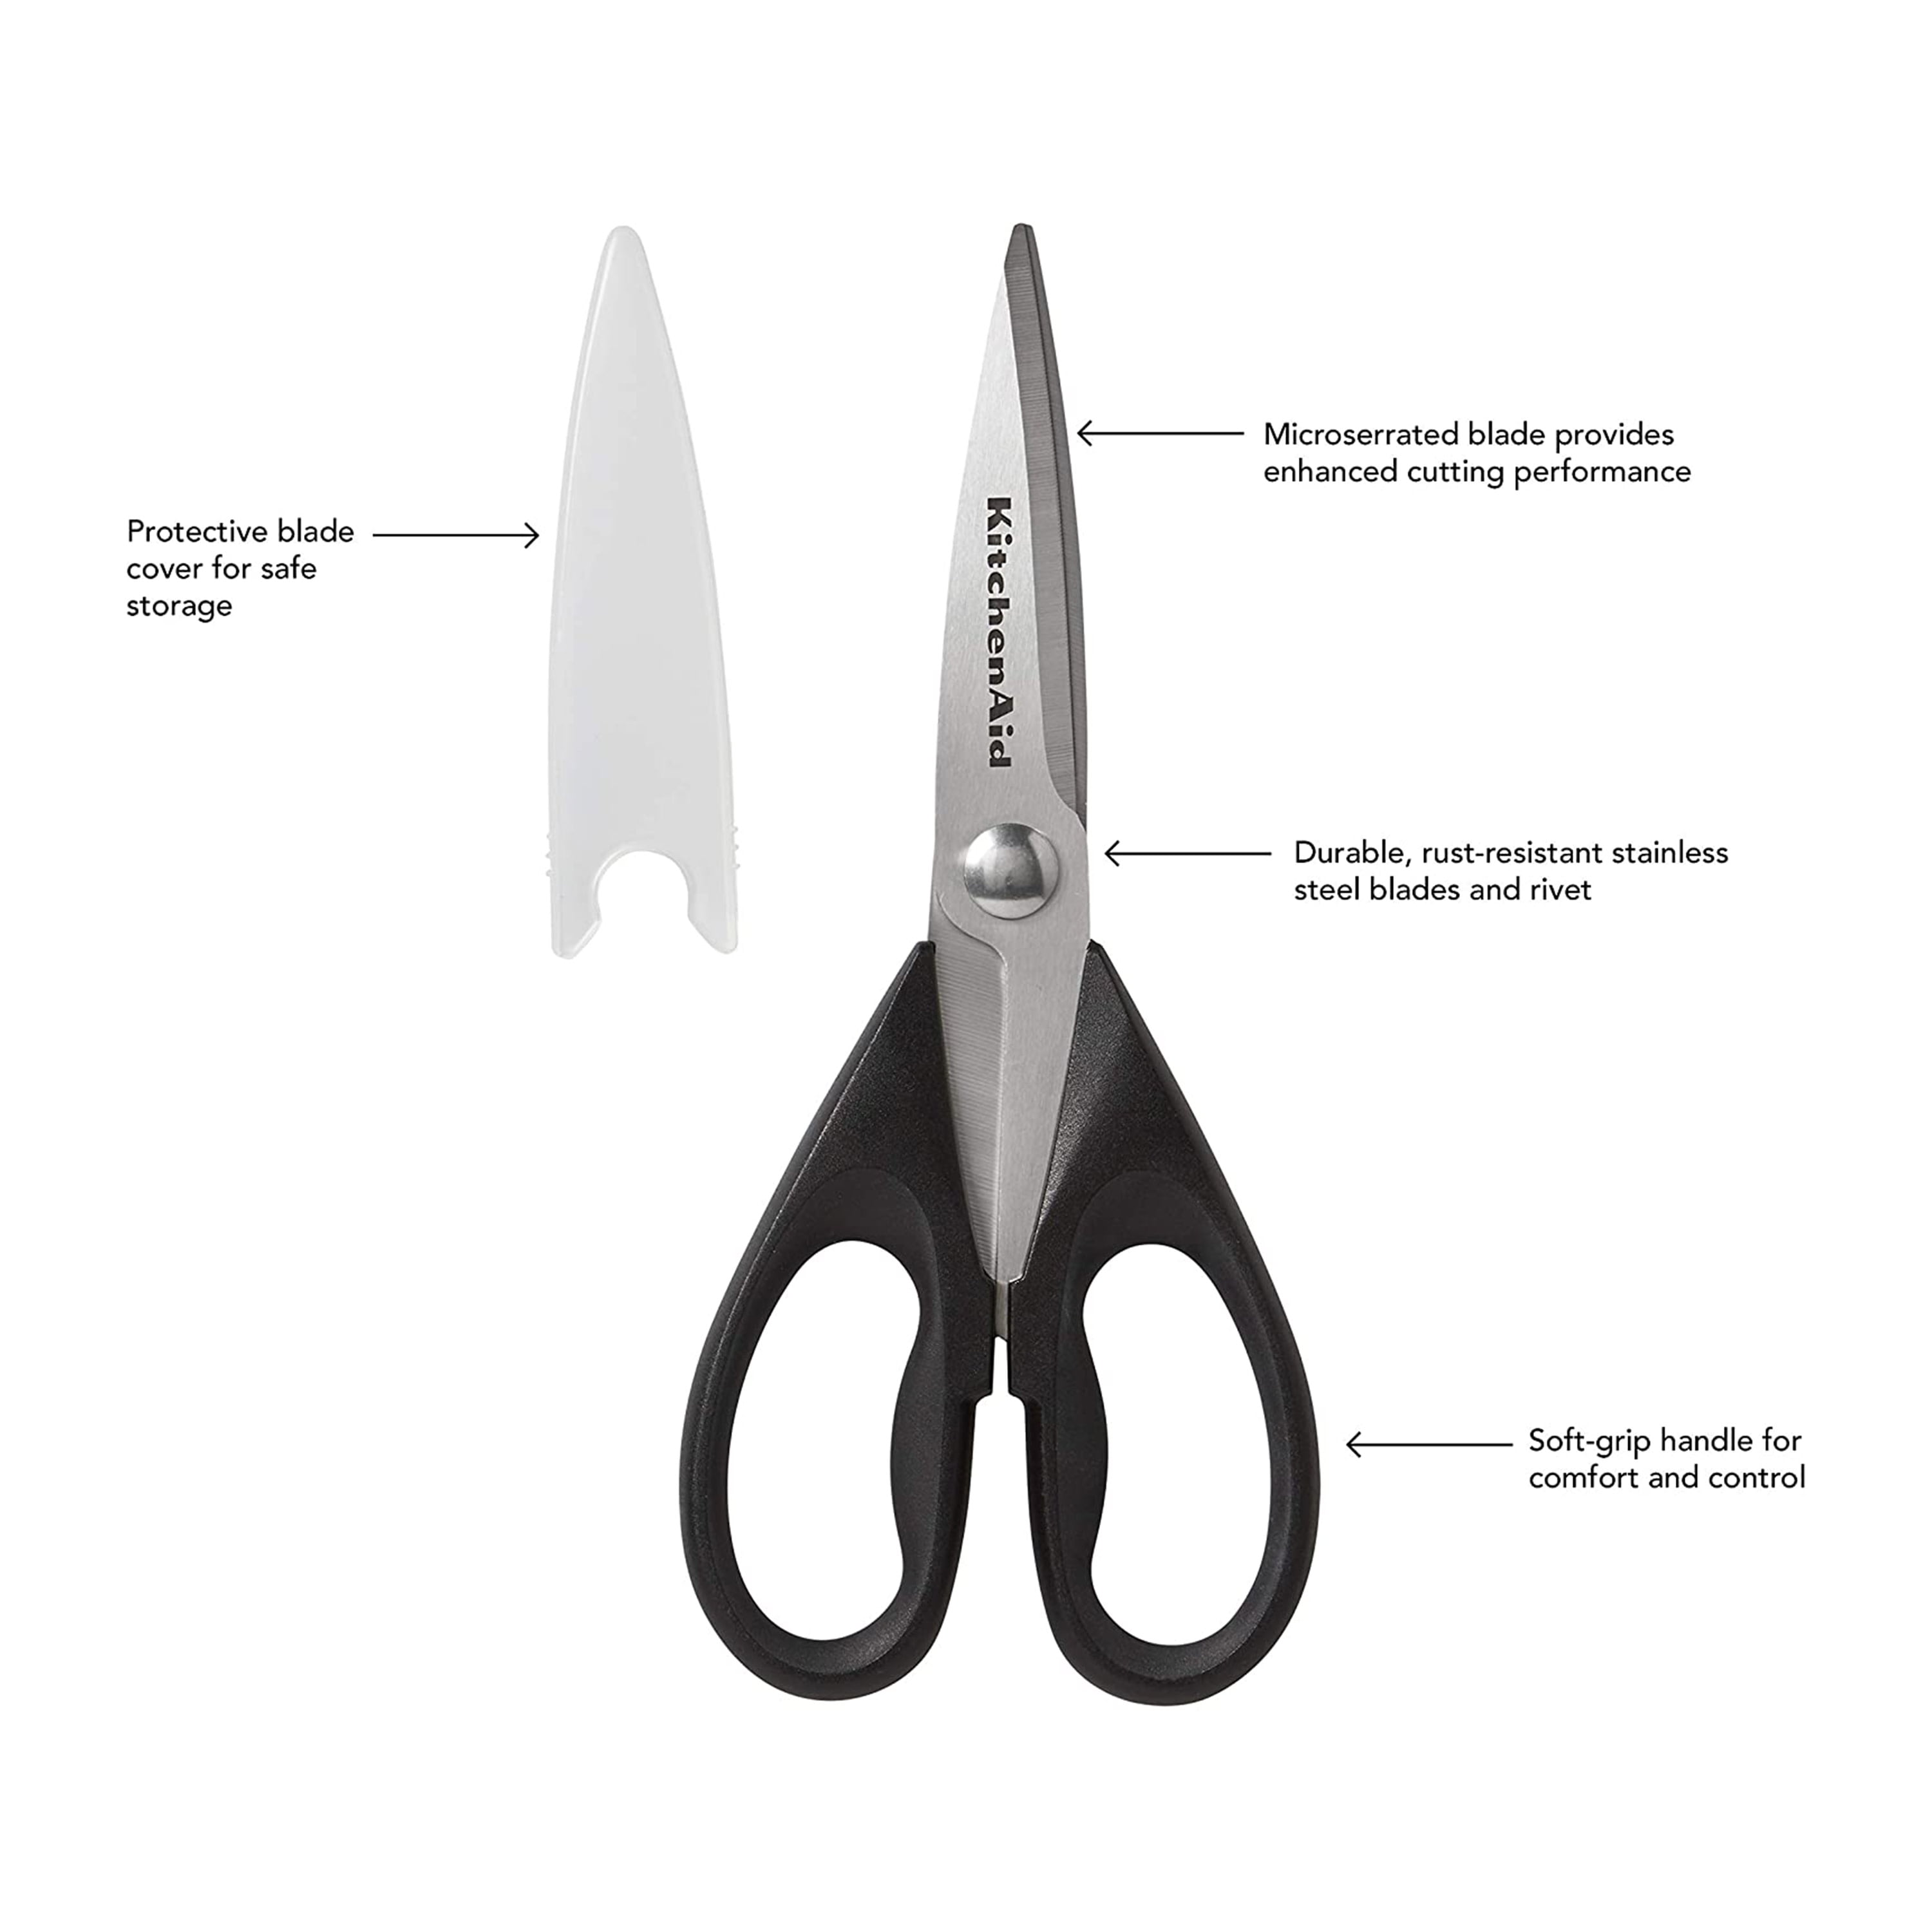 KitchenAid all purpose utility kitchen shears scissors in choice of color